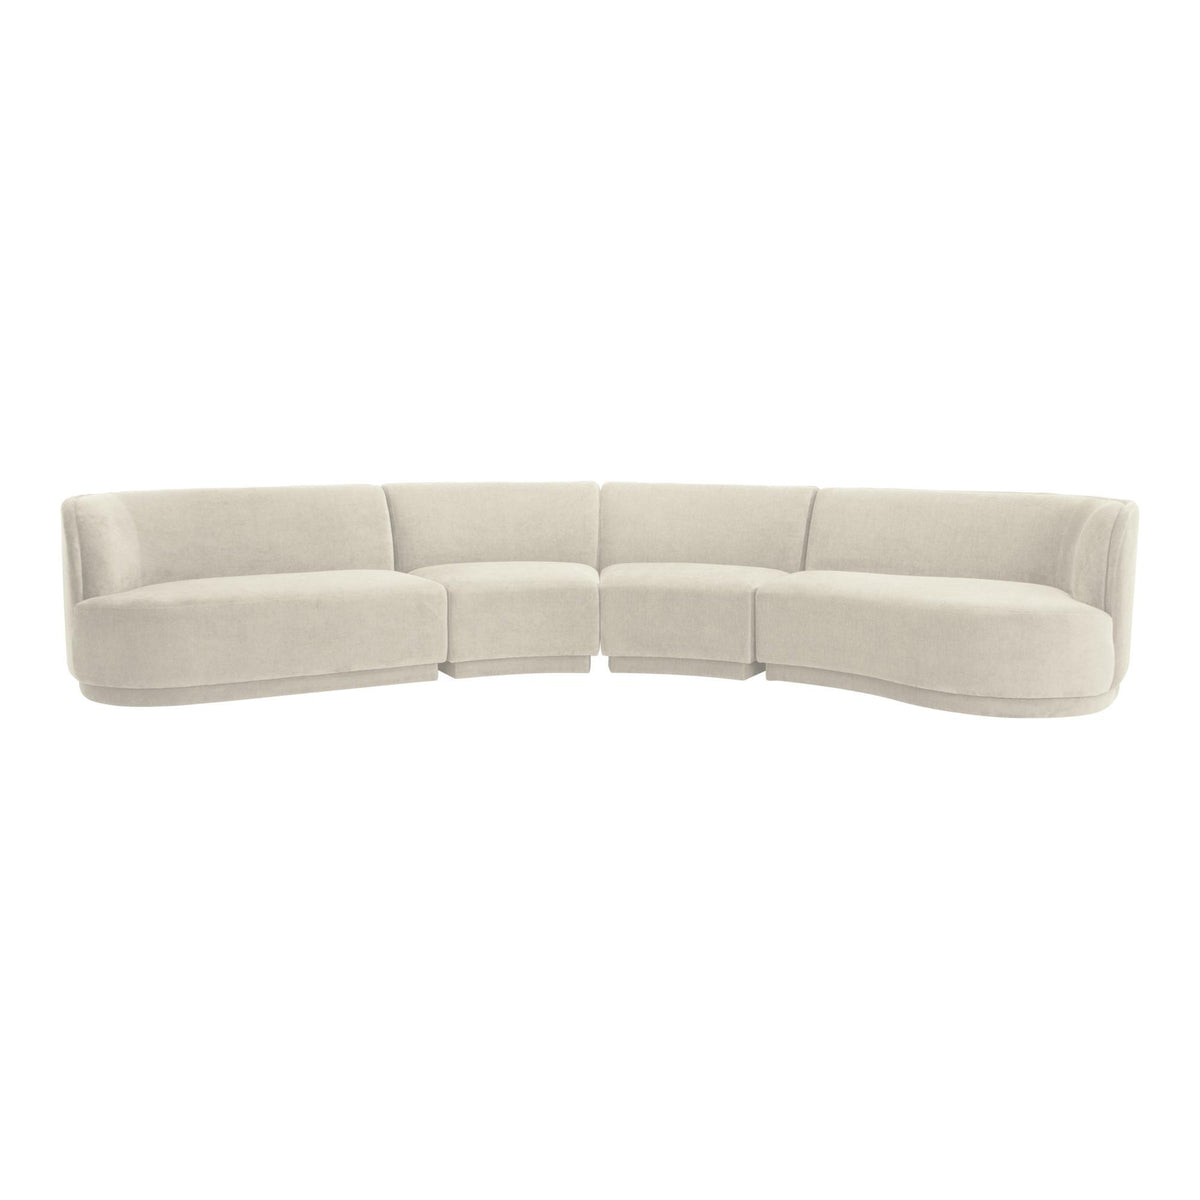 Moe's Home Collection Yoon Eclipse Modular Sectional Chaise Right Sweet Cream - JM-1023-05